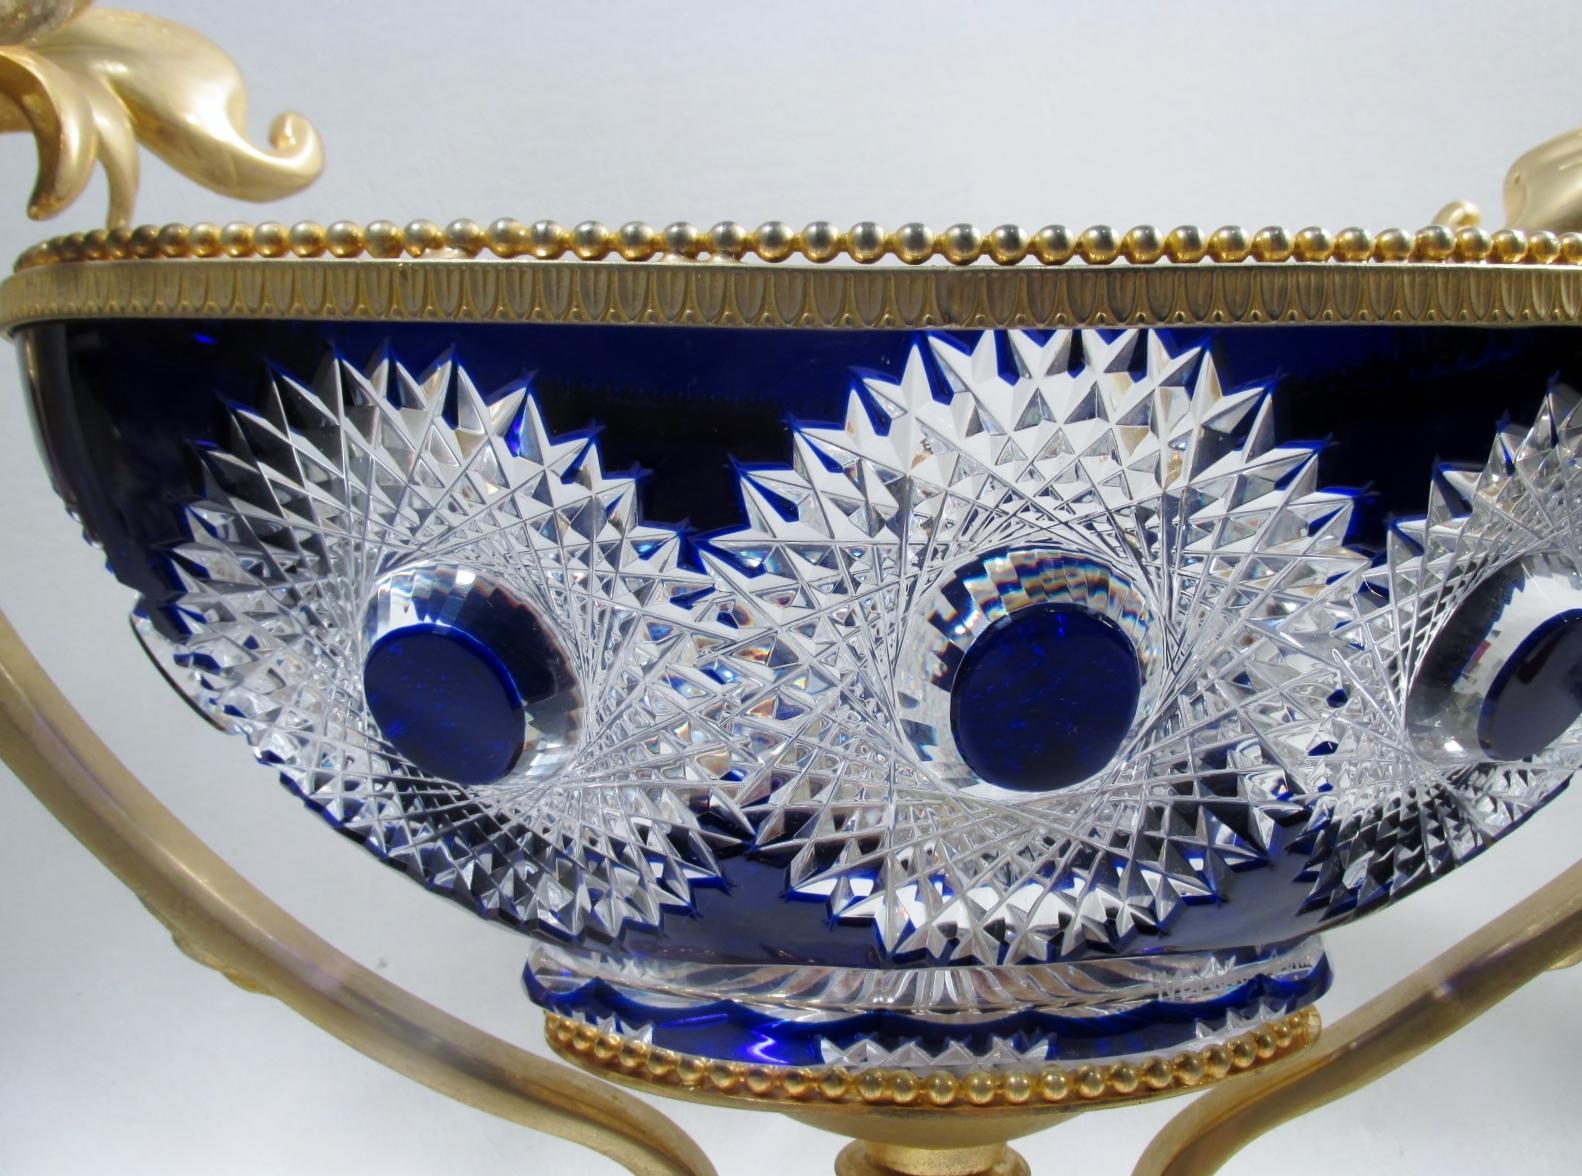 Luxury at its finest, a rarely seen Martin Benito fine and heavy cobalt blue cut to clear centerpiece bowl in a gilt bronze doré mount of swans and Baroque scrolls. Made in France, this piece measures 13.75” to top of swan handles, 19.25” at widest,